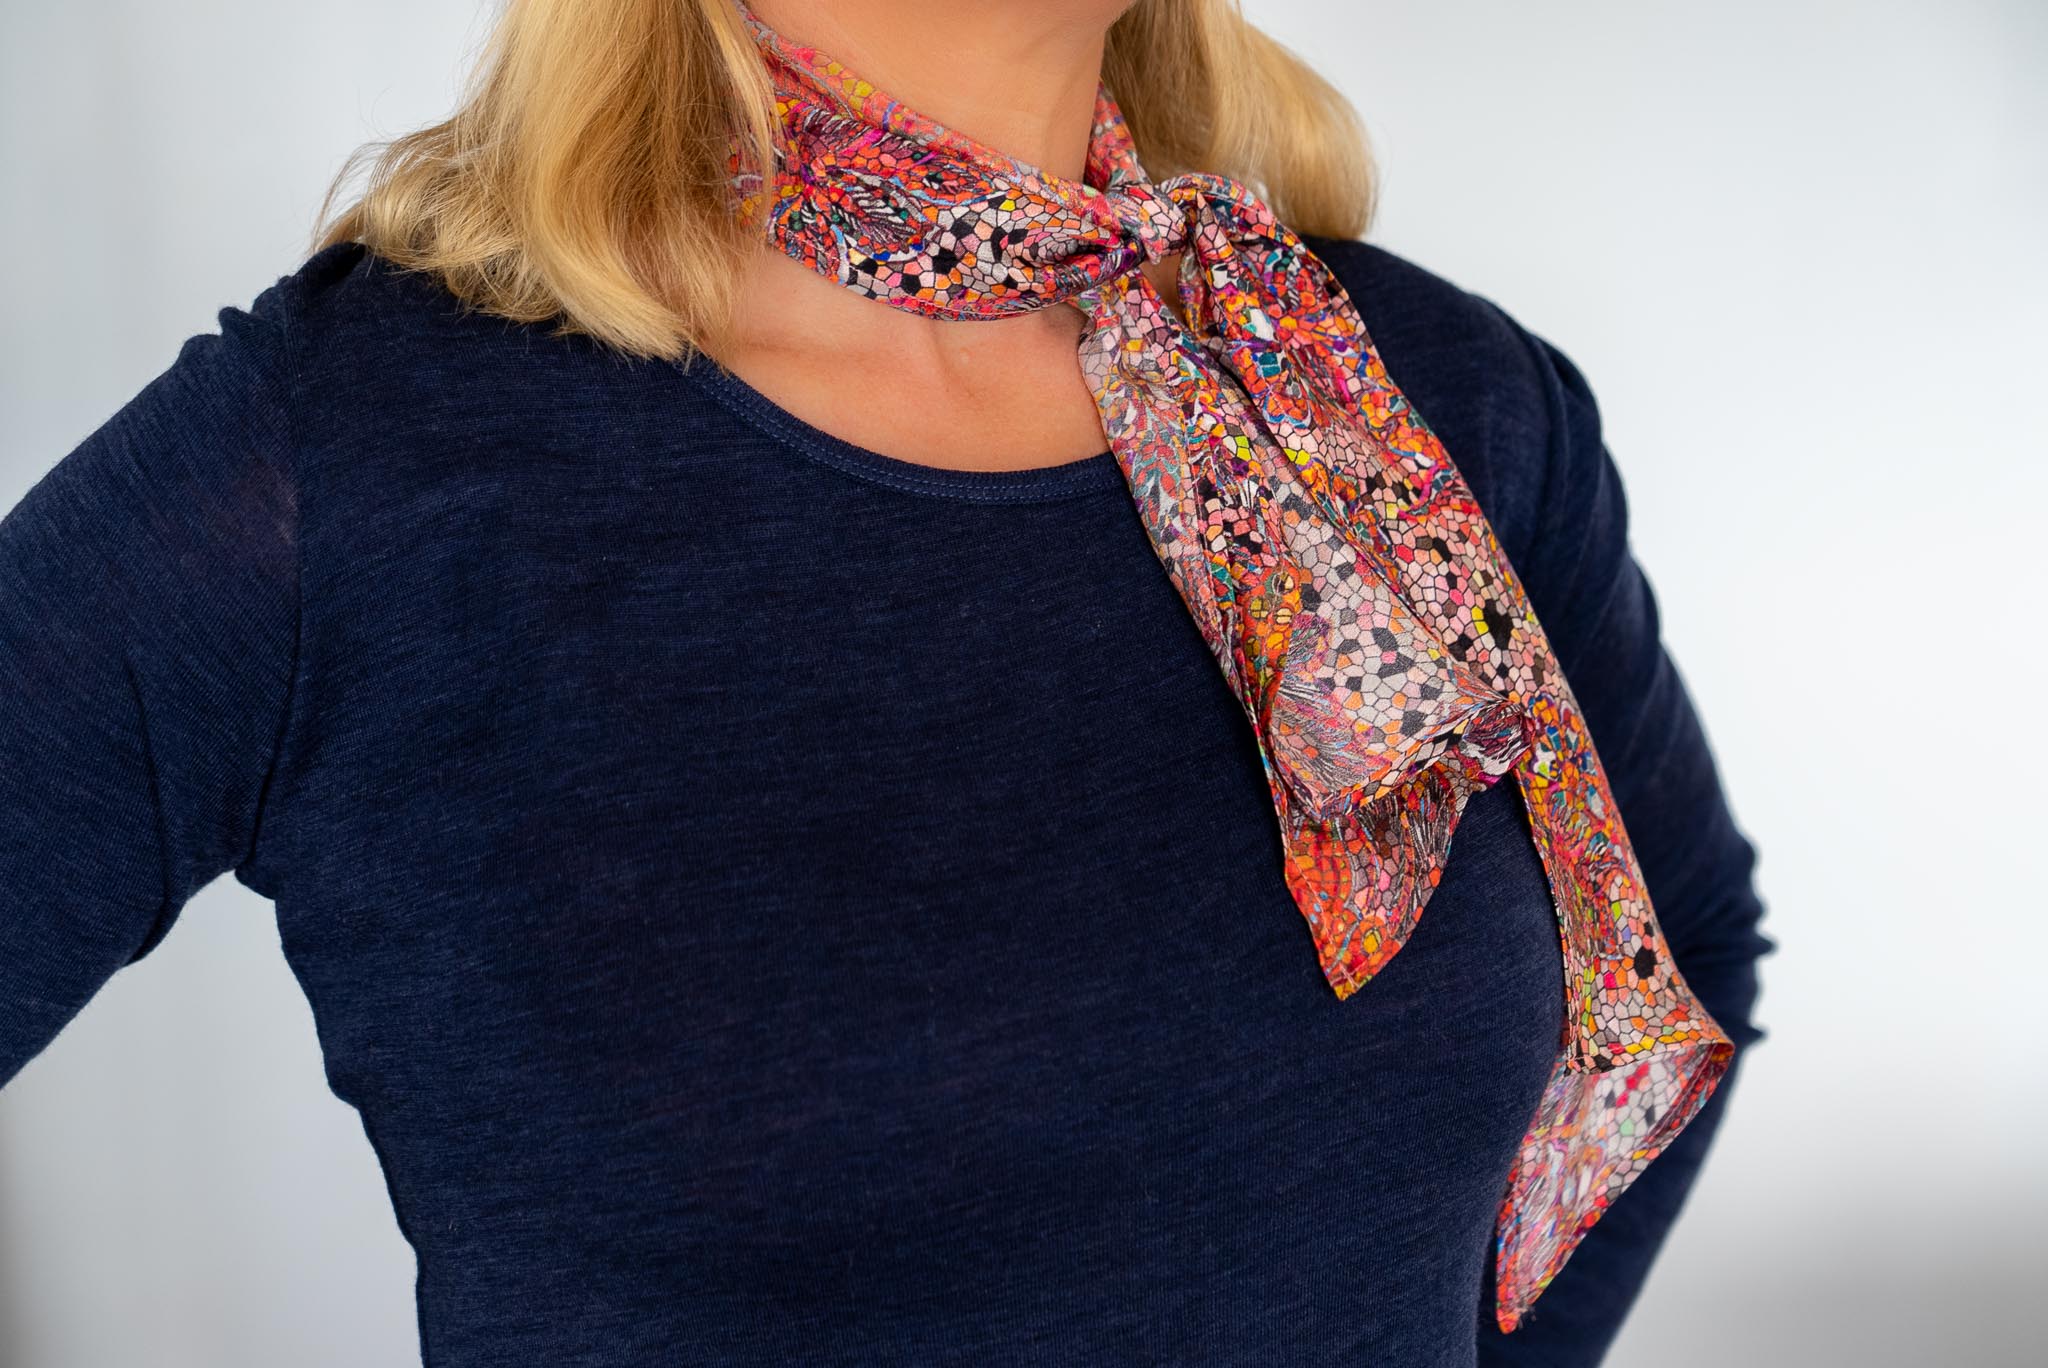 Silk scarf made in New Zealand